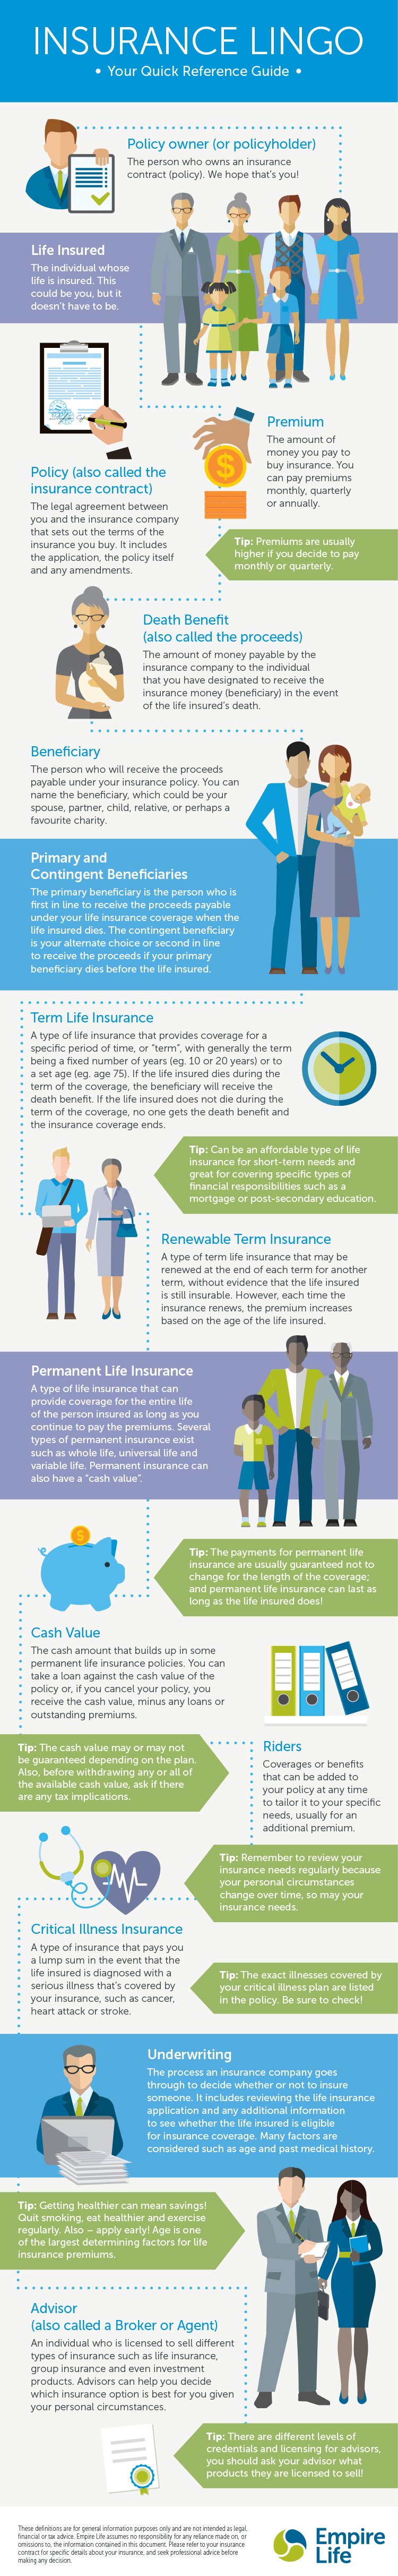 Insurance Lingo - Your Quick Reference Guide